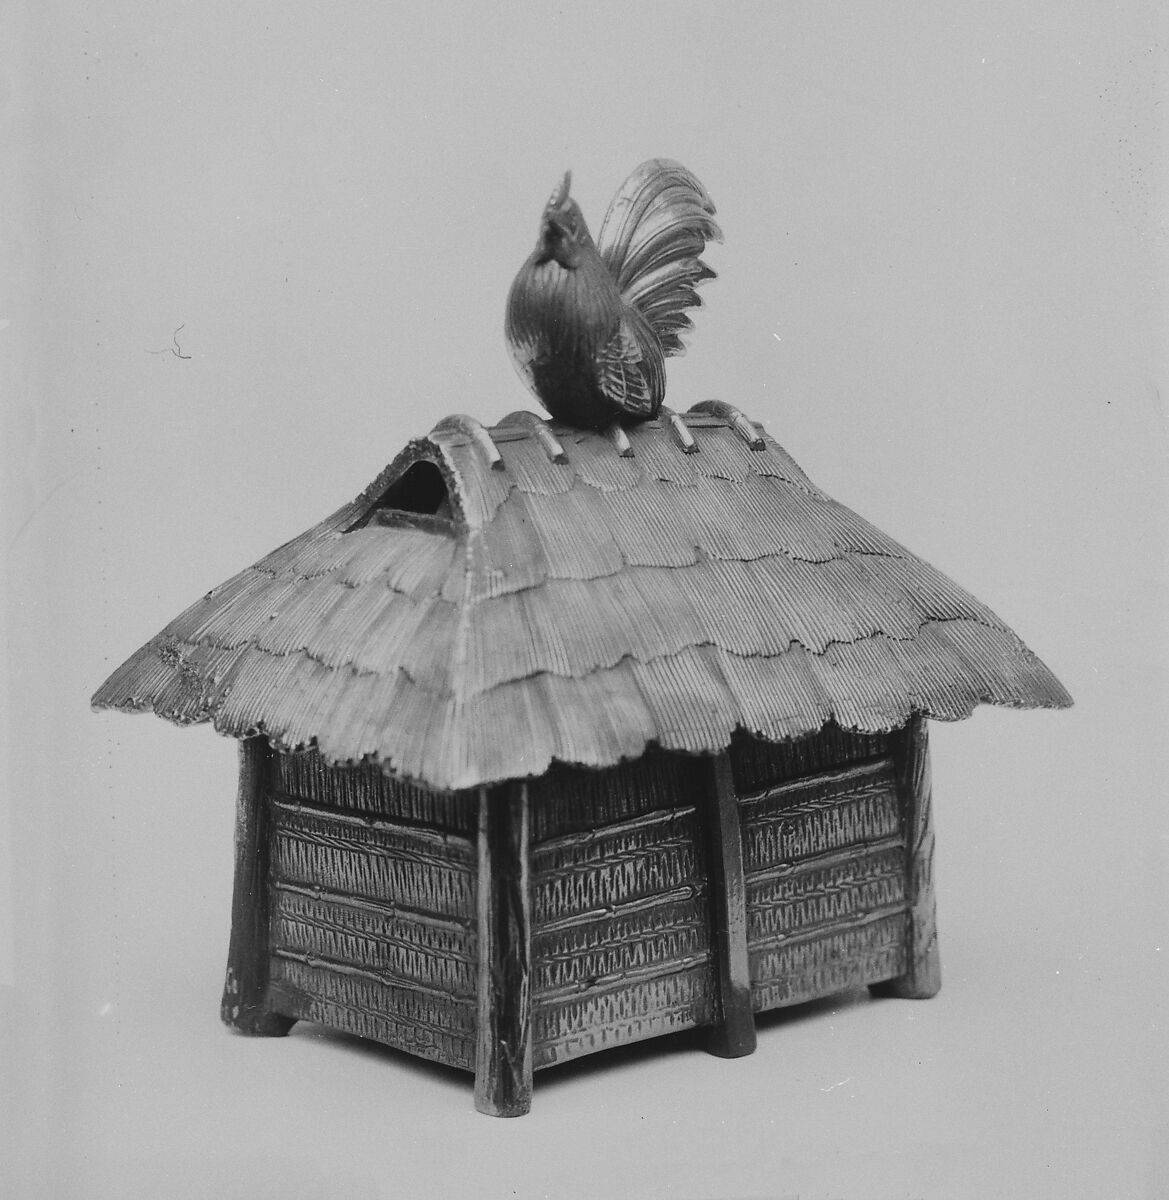 Censer in Form of a Rooster Perched on a Rooftop, Stoneware covered with a thin glaze showing lustre (Bizen ware), Japan 